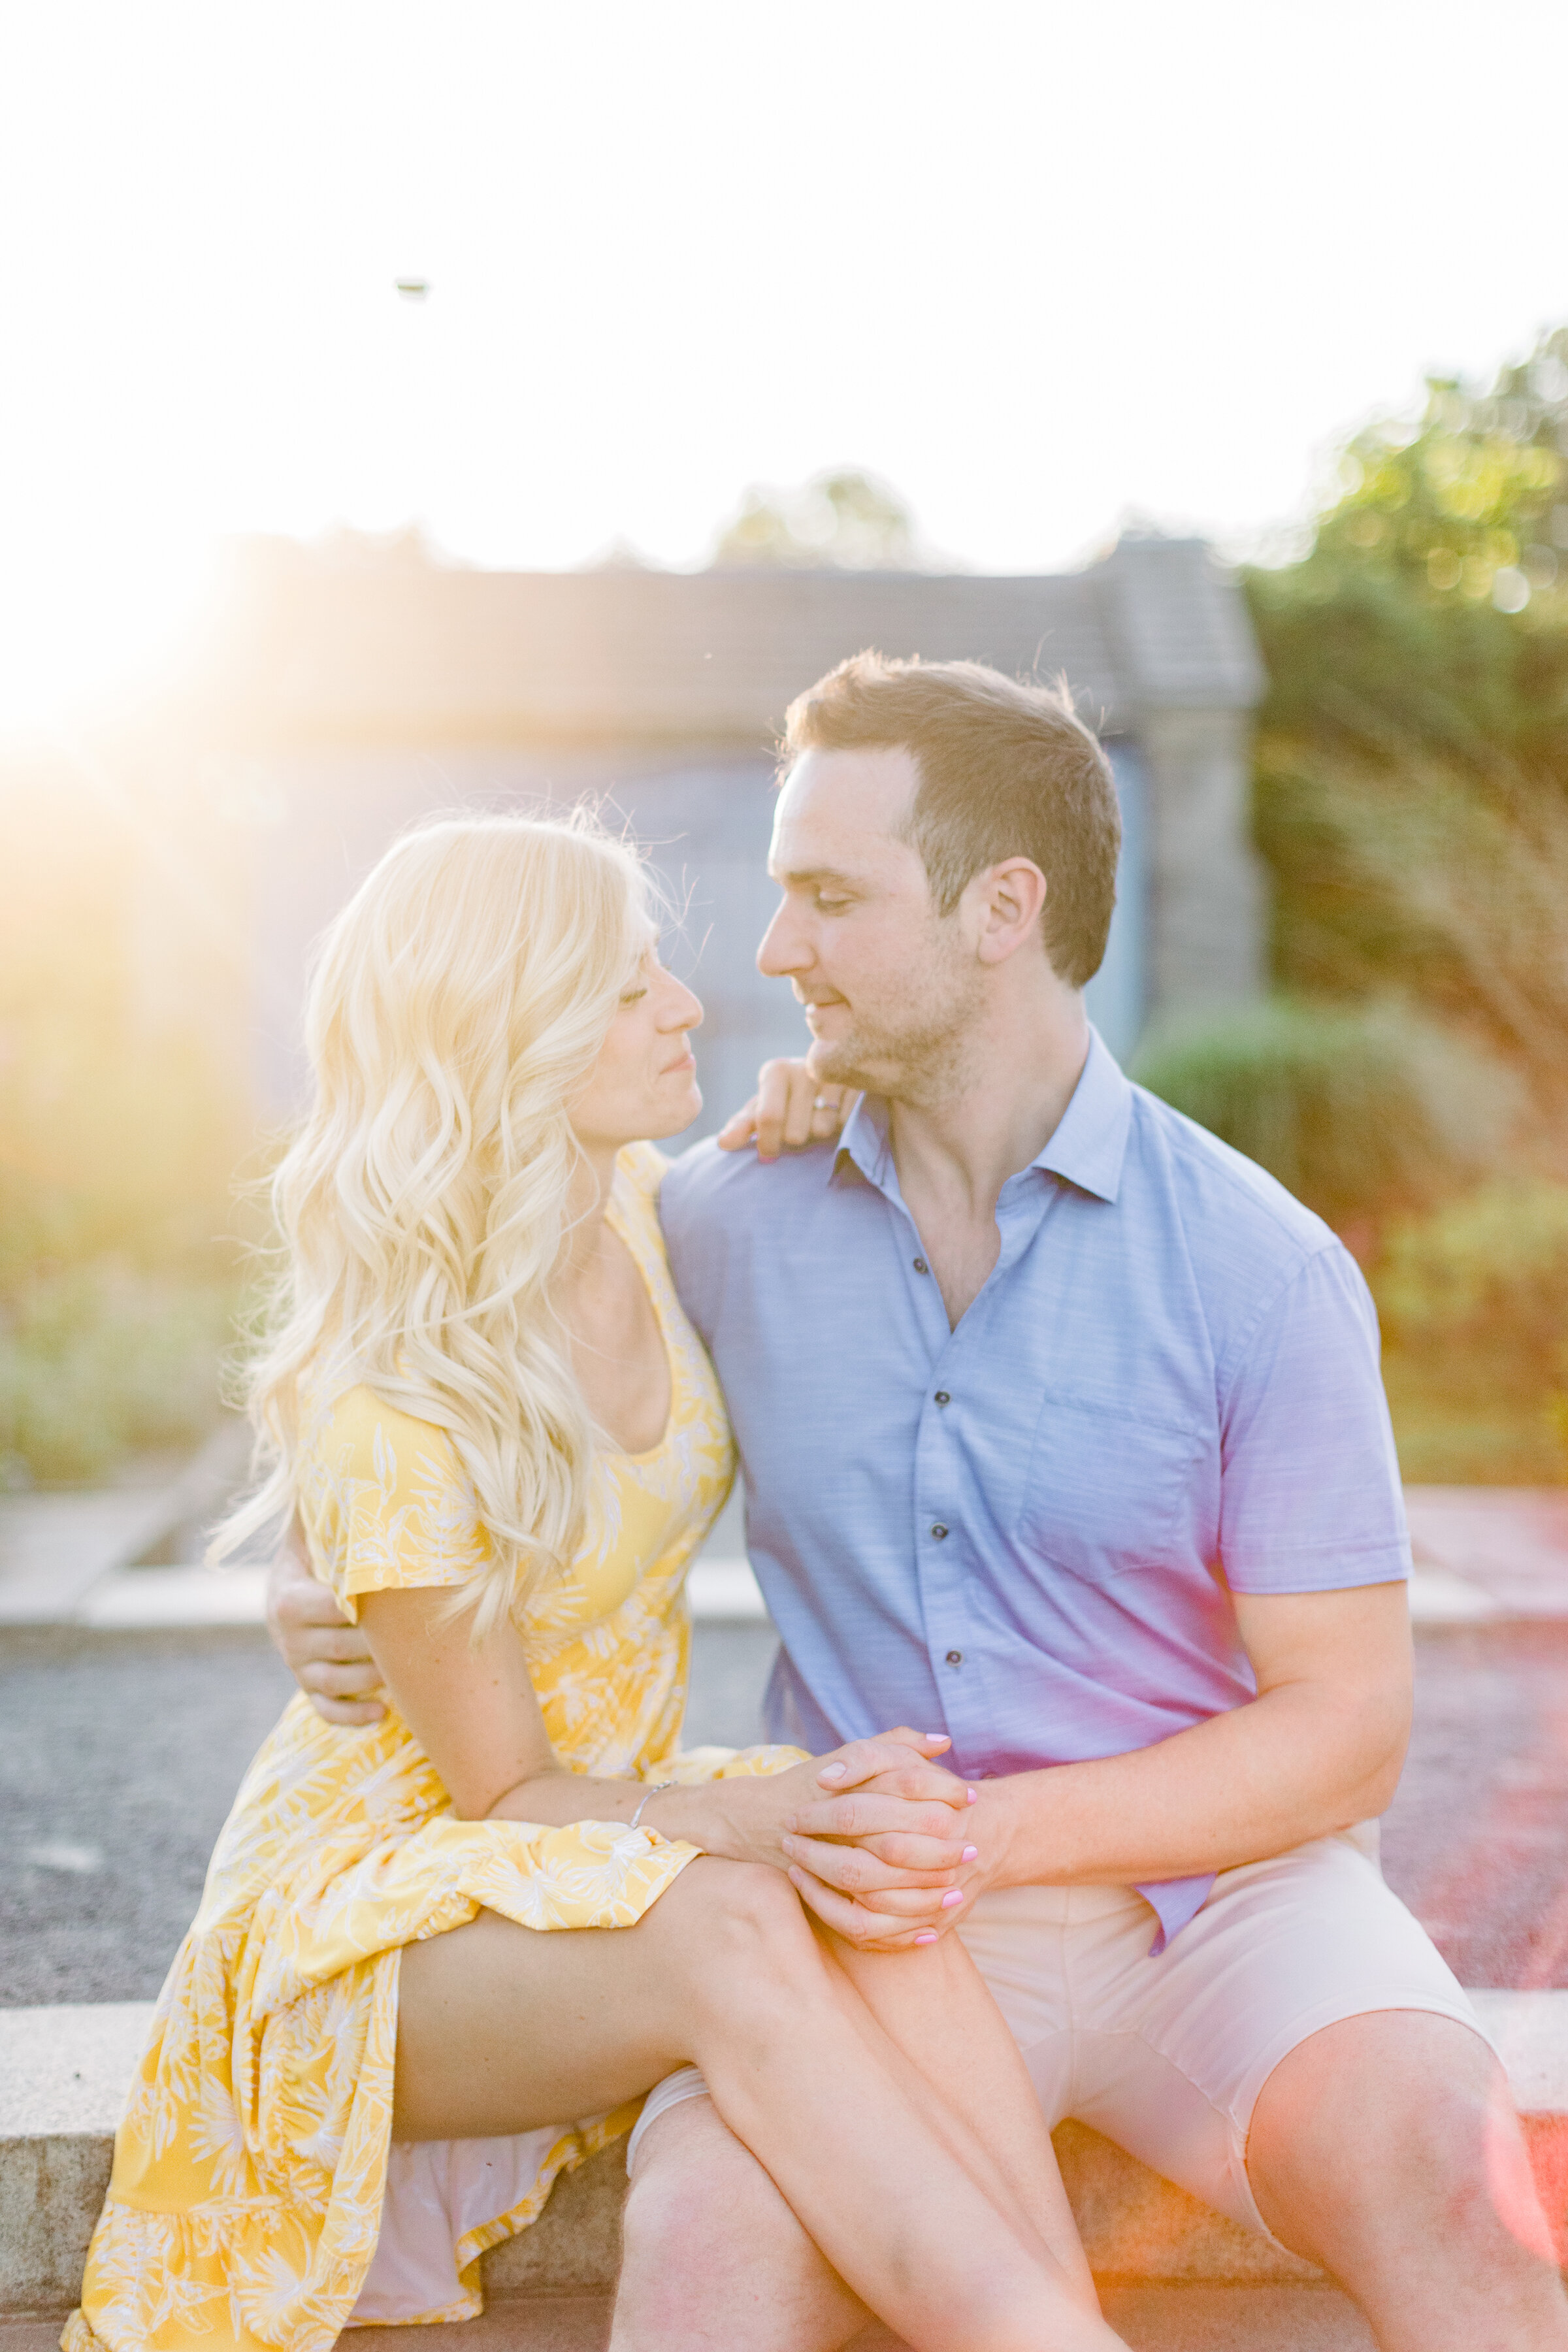  A beautiful couple sit together as the sun streams in in a beautiful engagement styled photo shoot in Montreal, Canada. Couple sitting pose inspiration sundress inspiration men’s attire inspiration client attire inspiration Chelsea Mason Photography